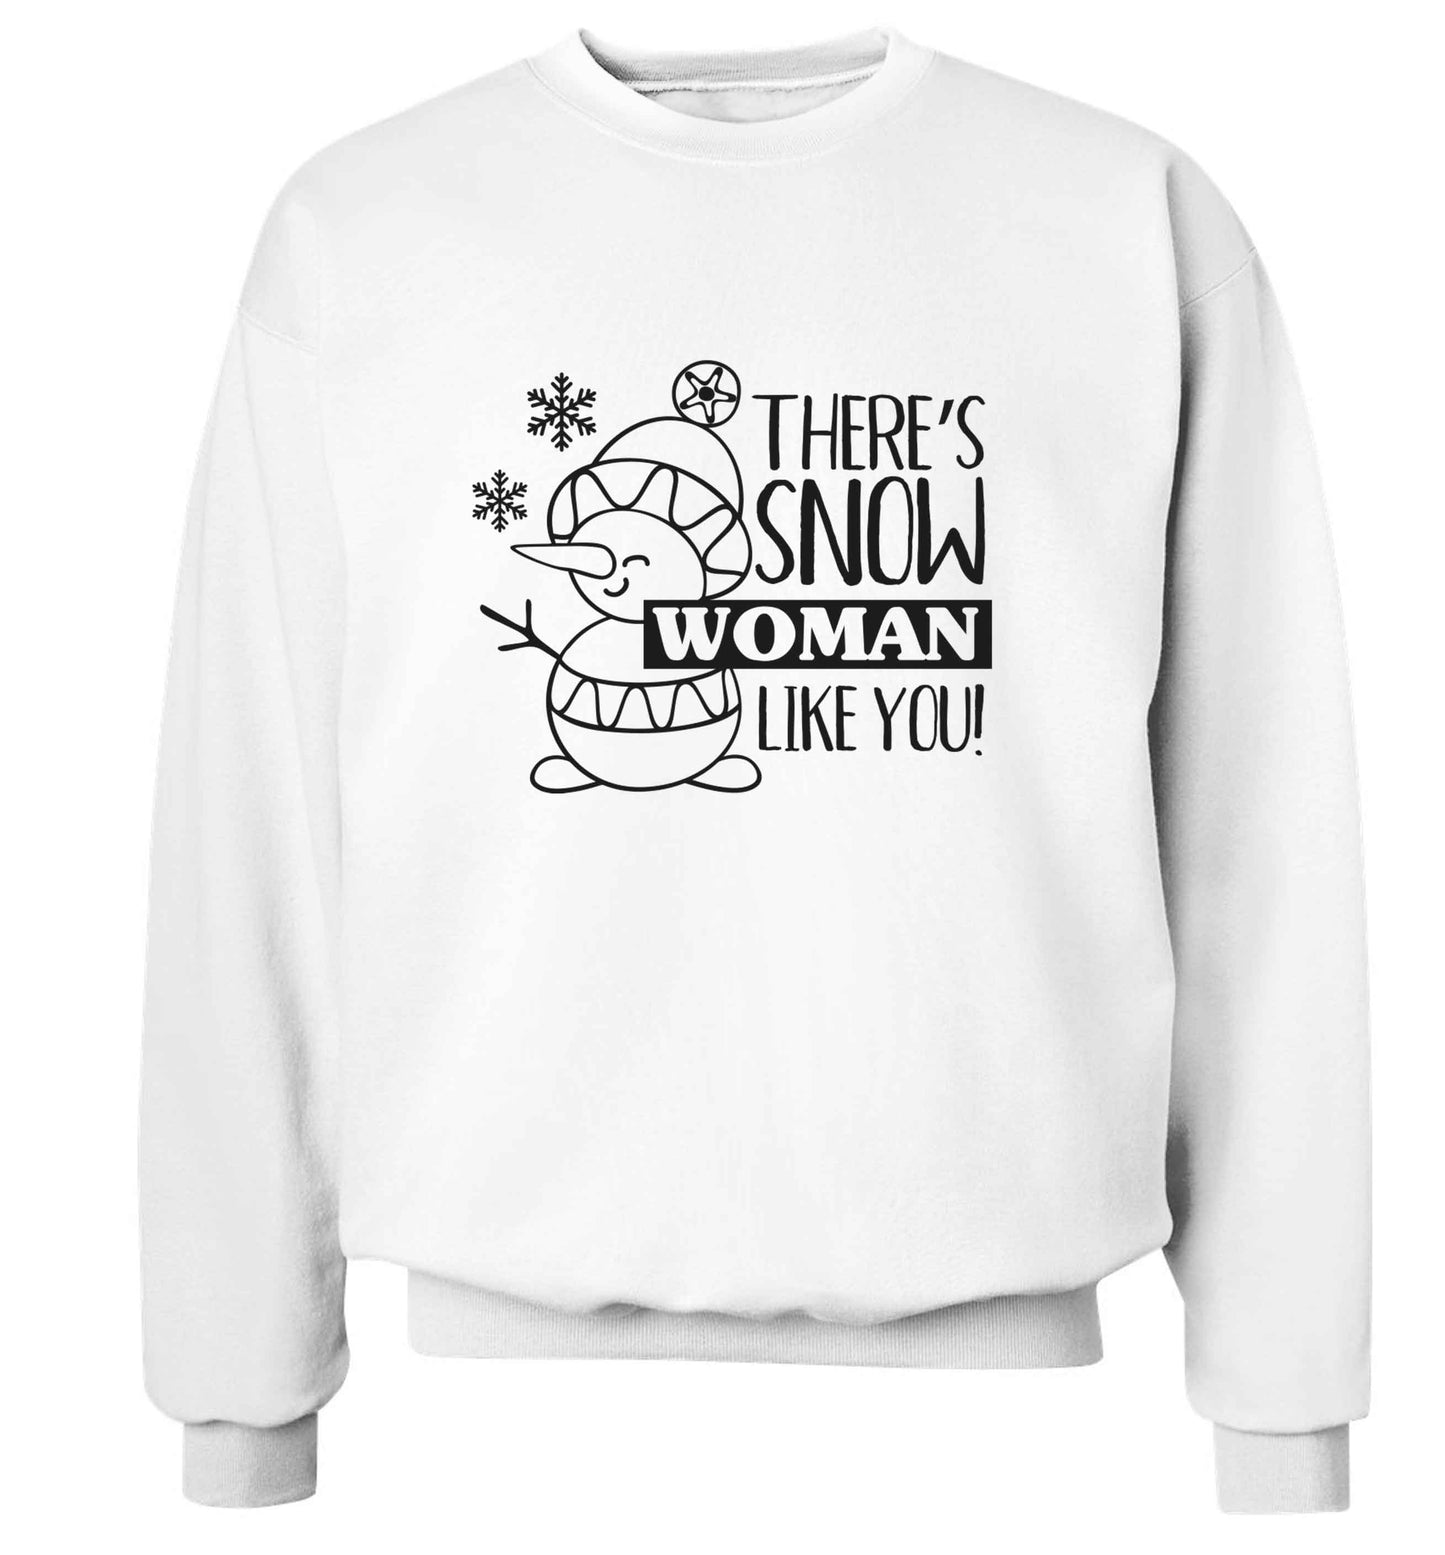 There's snow woman like you adult's unisex white sweater 2XL